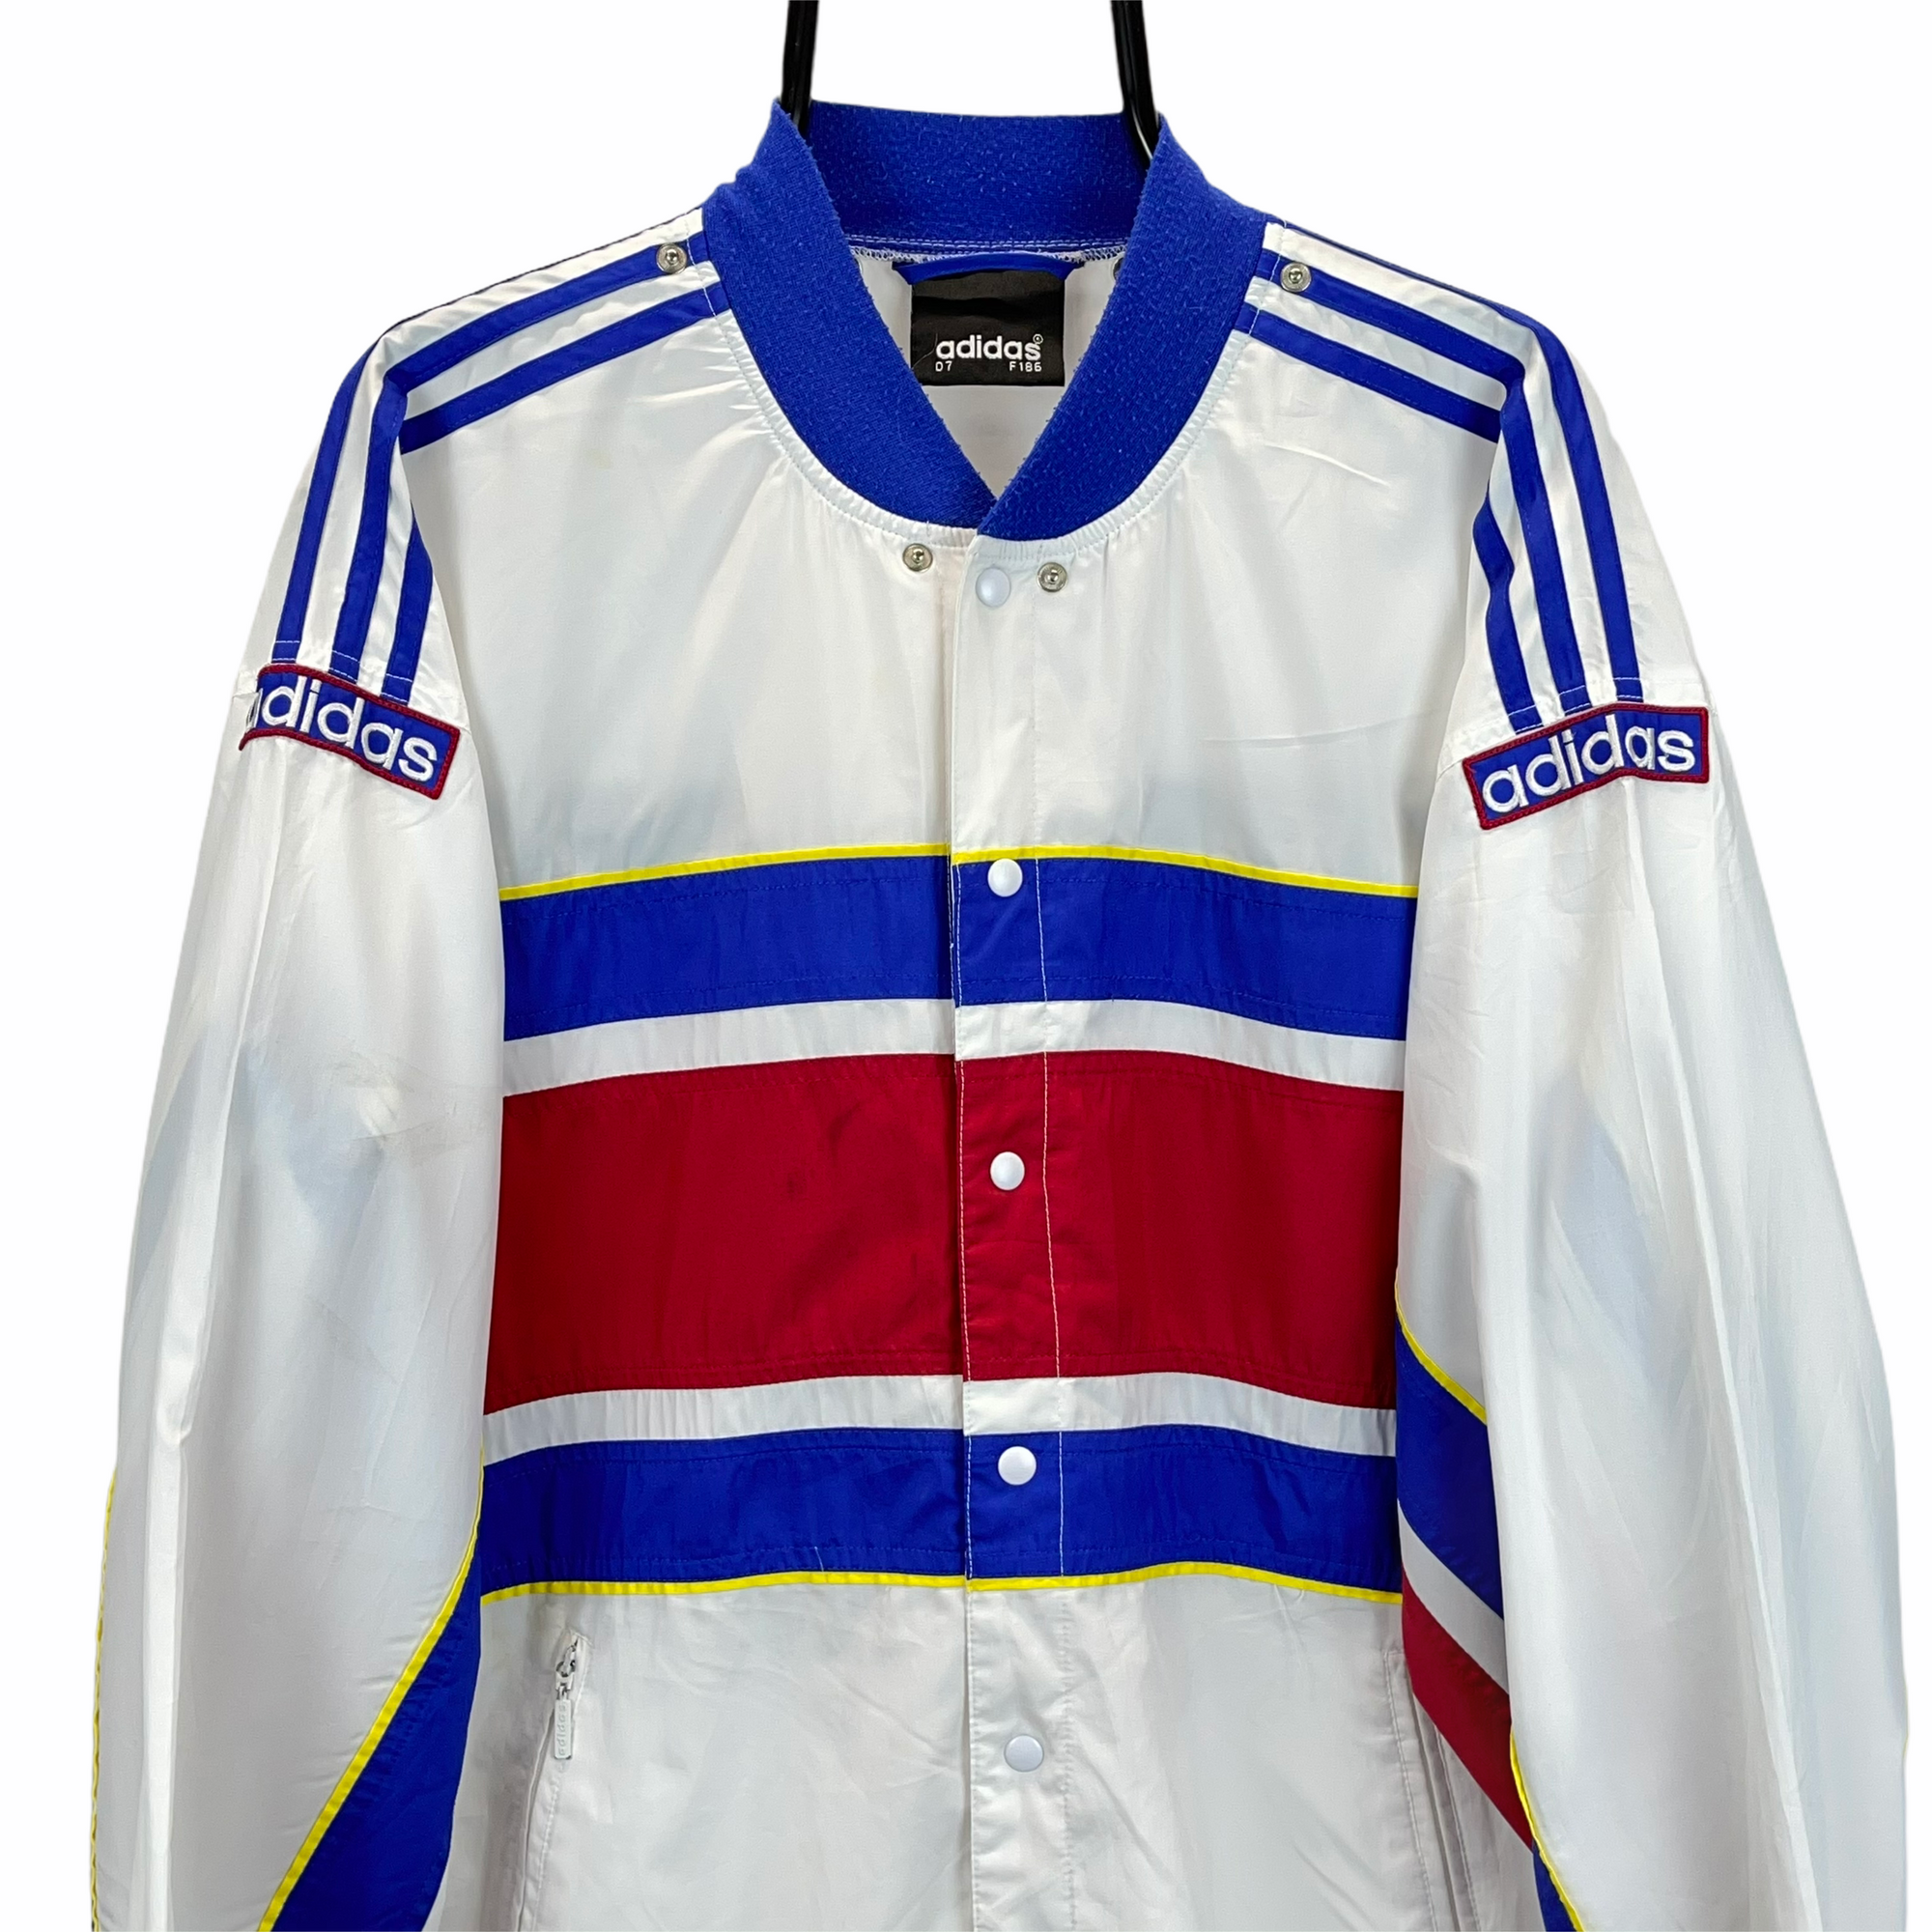 VINTAGE 80S ADIDAS TRACK JACKET IN WHITE, RED & BLUE - MEN'S LARGE/WOMEN'S XL